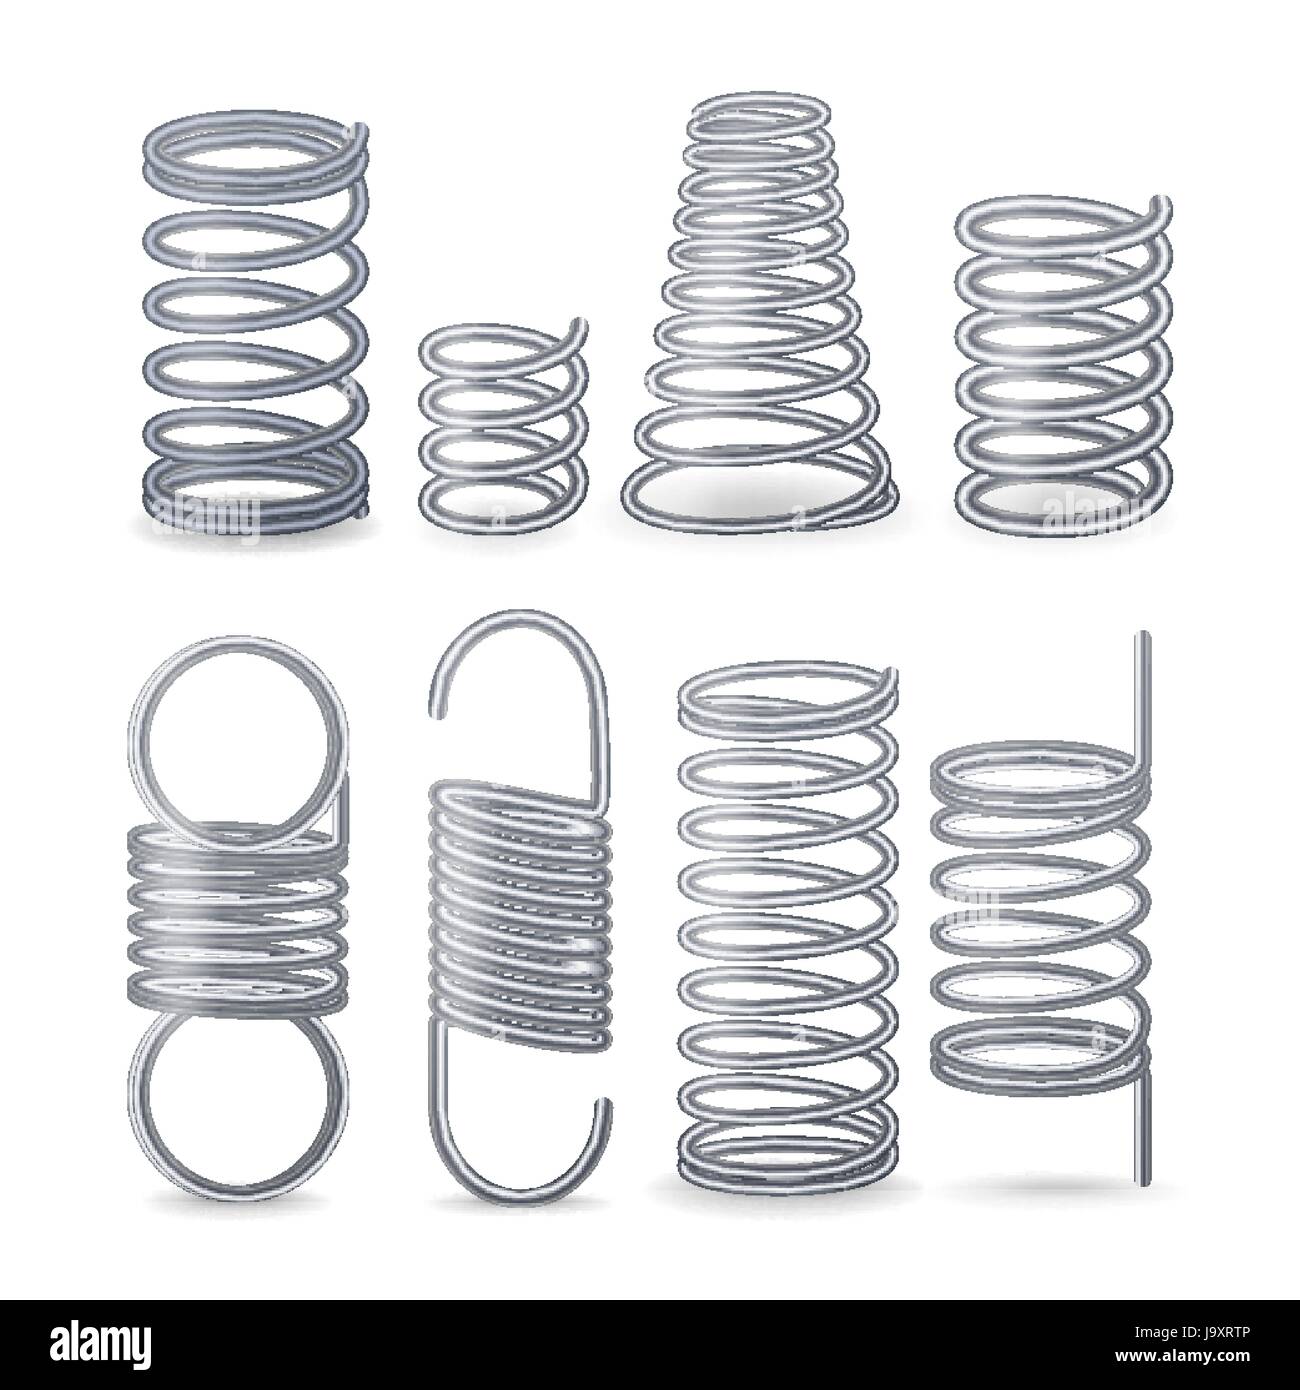 Spiral Flexible Wire. Springs Of Compression, Tension And Torsion. Set Stock Vector